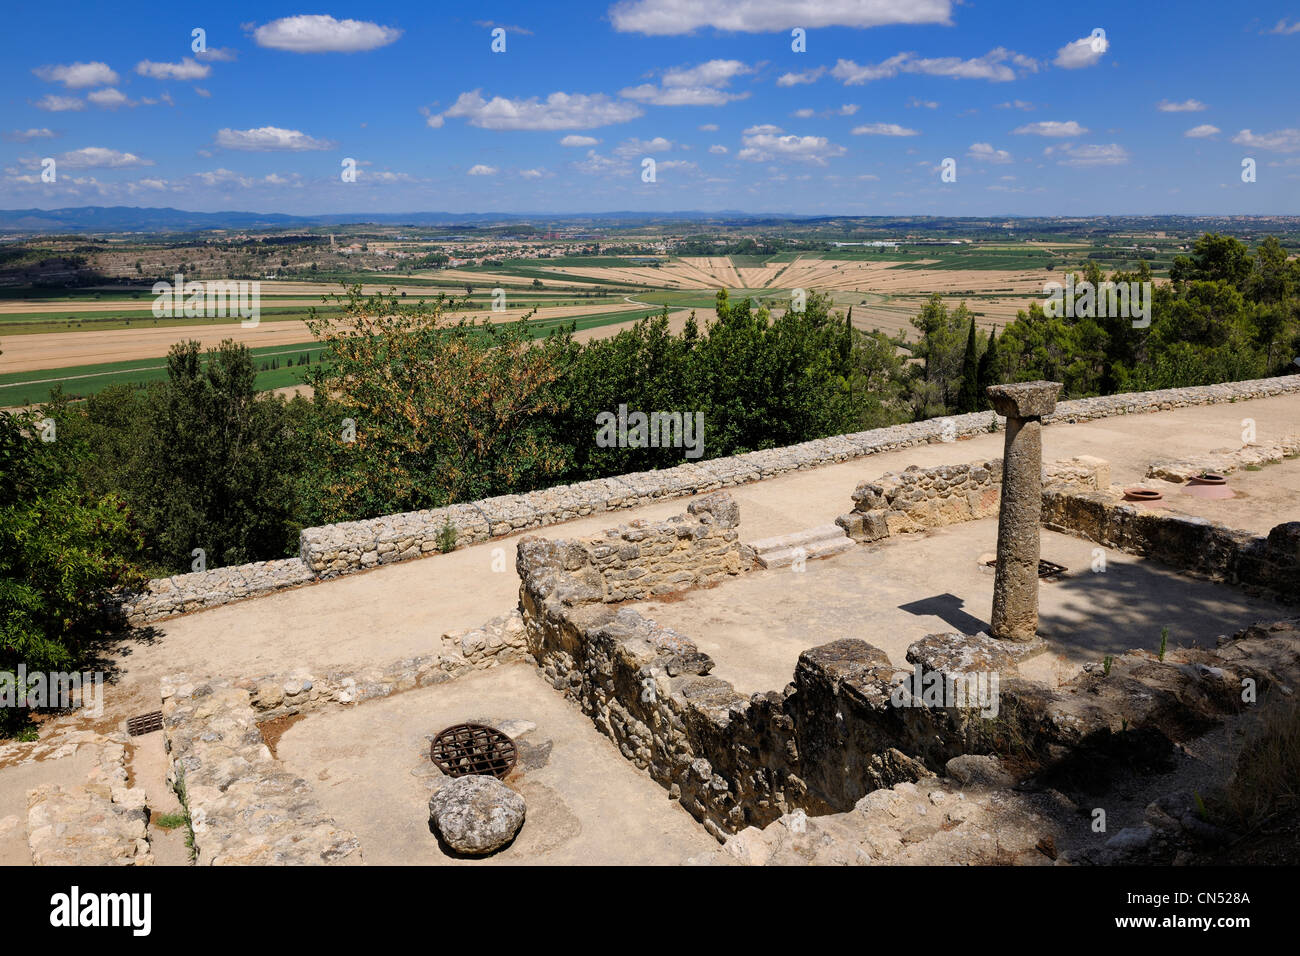 France, Herault, Nissan lez Enserune, the Oppidum d'Enserune is an ancient hill town between the sixth century BC and first Stock Photo